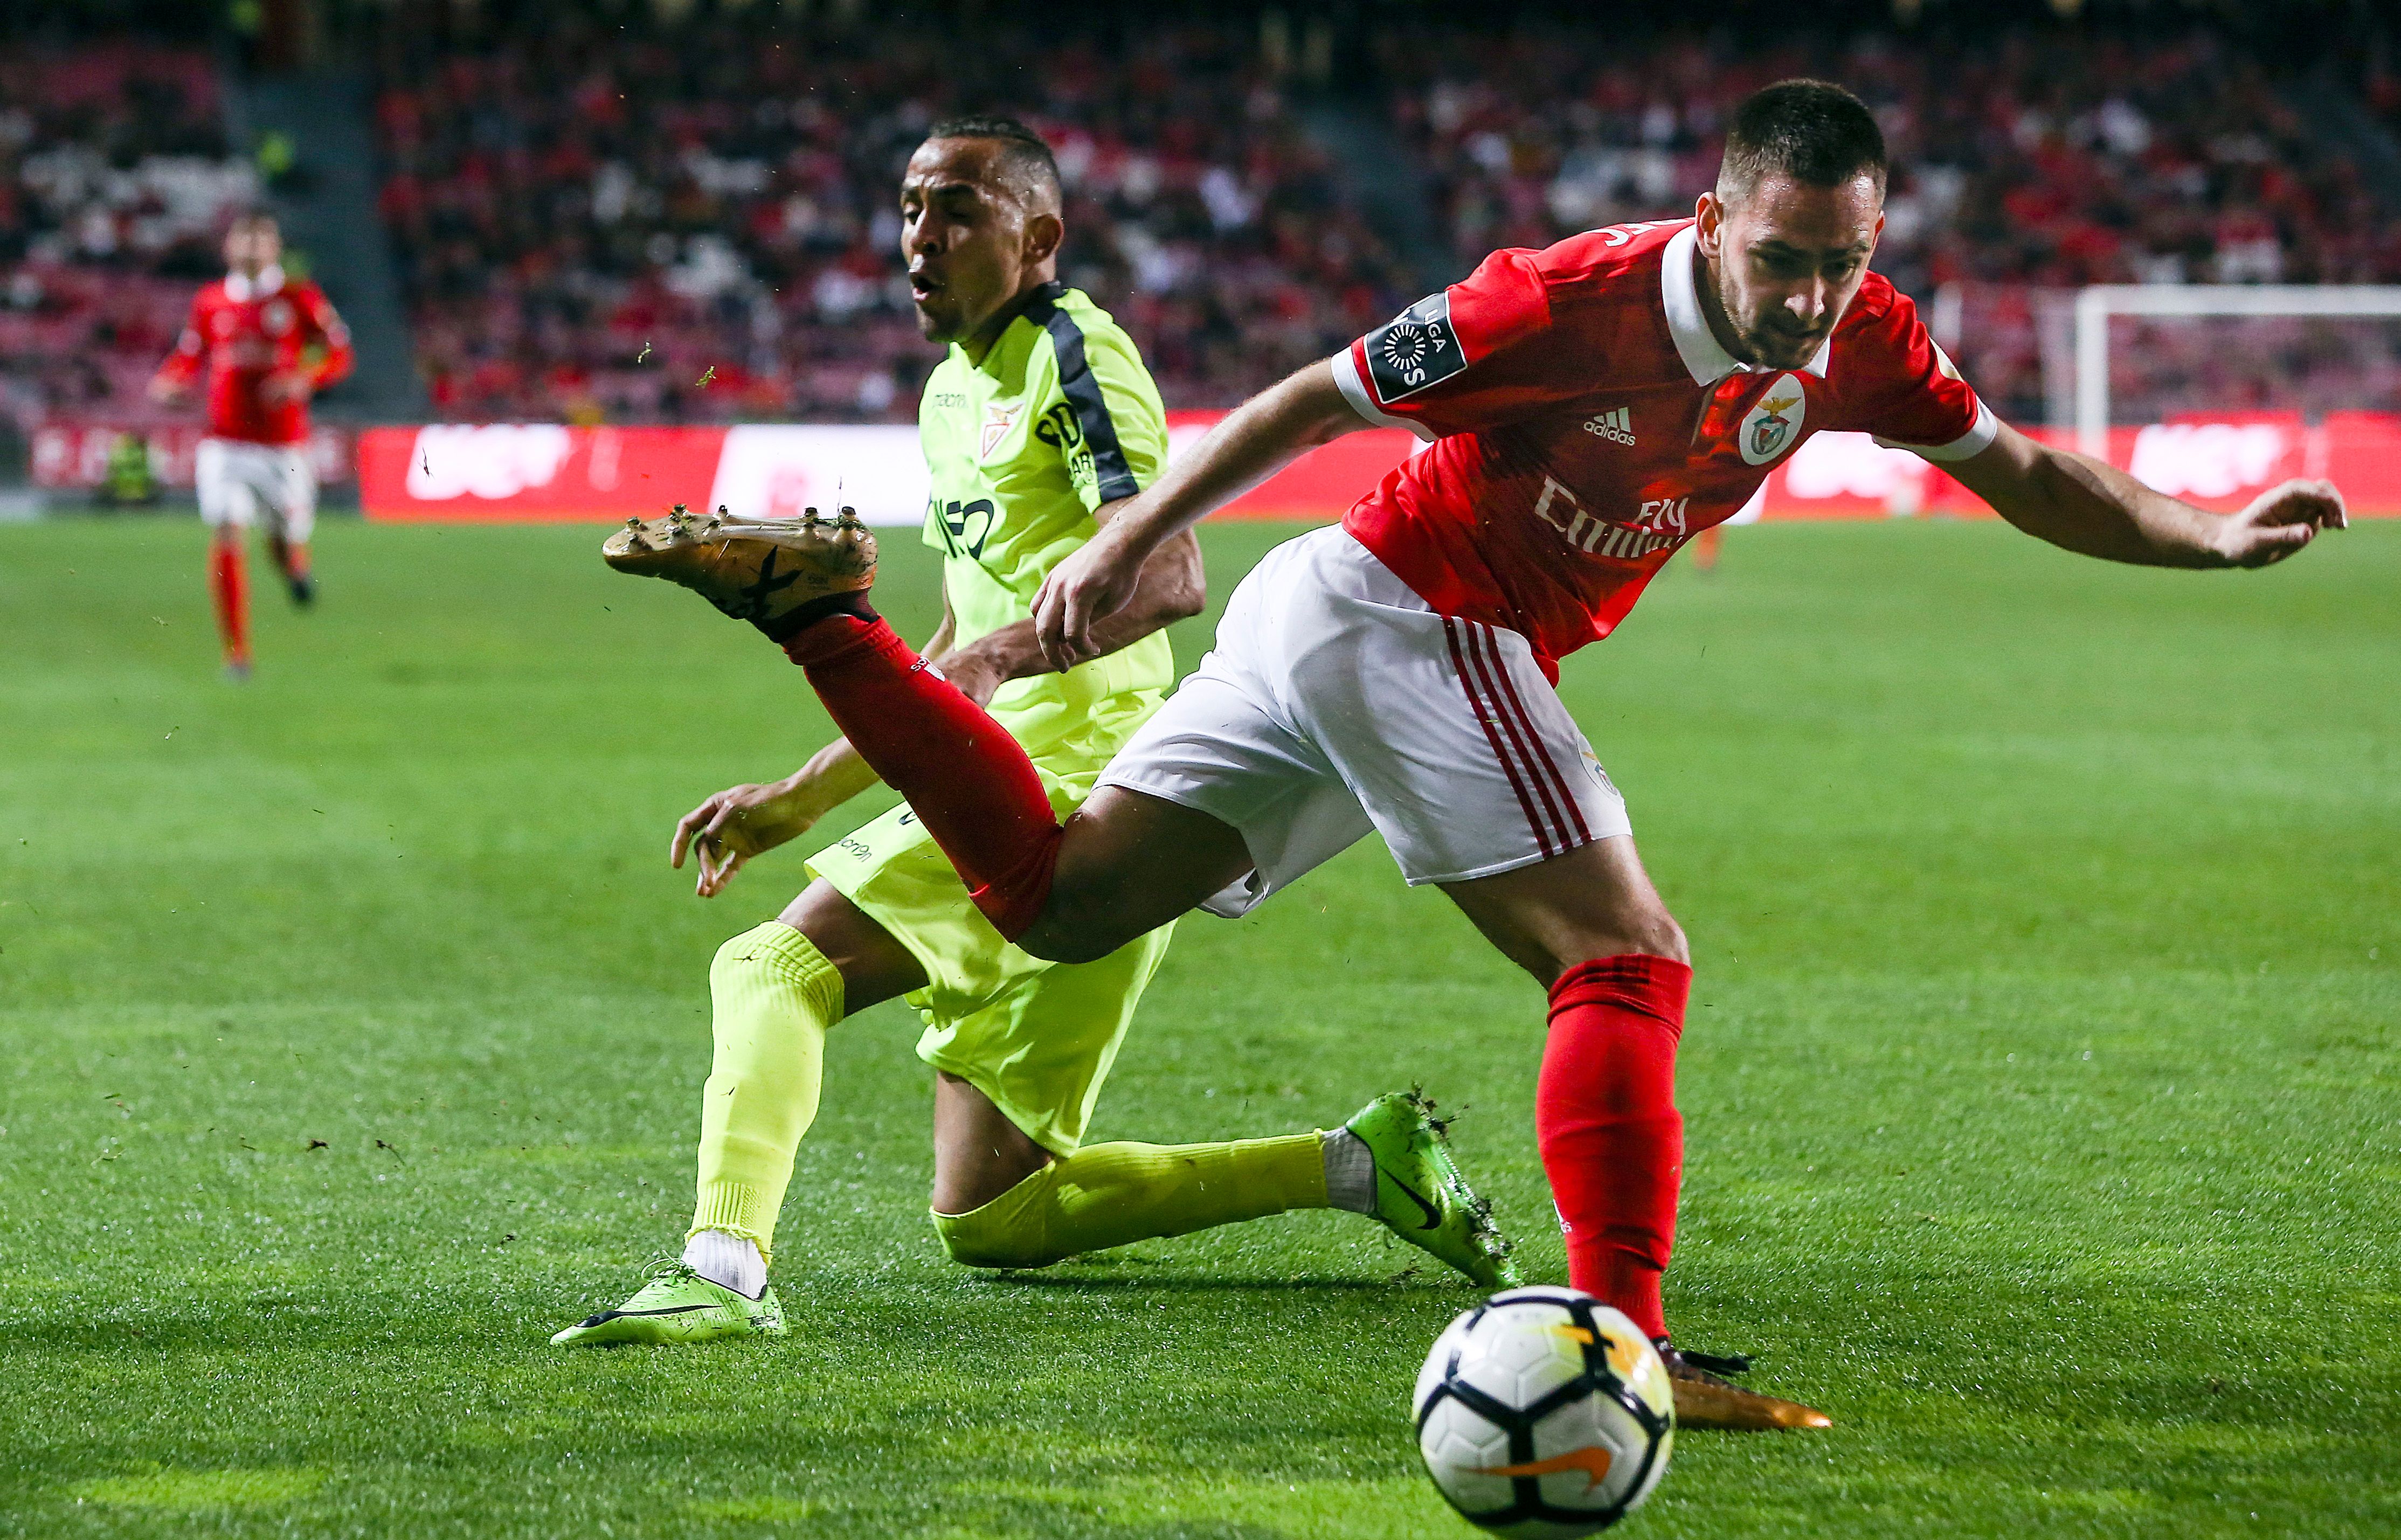 Aves' defender Nildo Petrolina (L) vies with Benfica's Serbian midfielder Andrija Zivkovic during the Portuguese league football match between SL Benfica and CD Aves at the La Luz stadium in Lisbon on March 10, 2018. / AFP PHOTO / CARLOS COSTA        (Photo credit should read CARLOS COSTA/AFP/Getty Images)